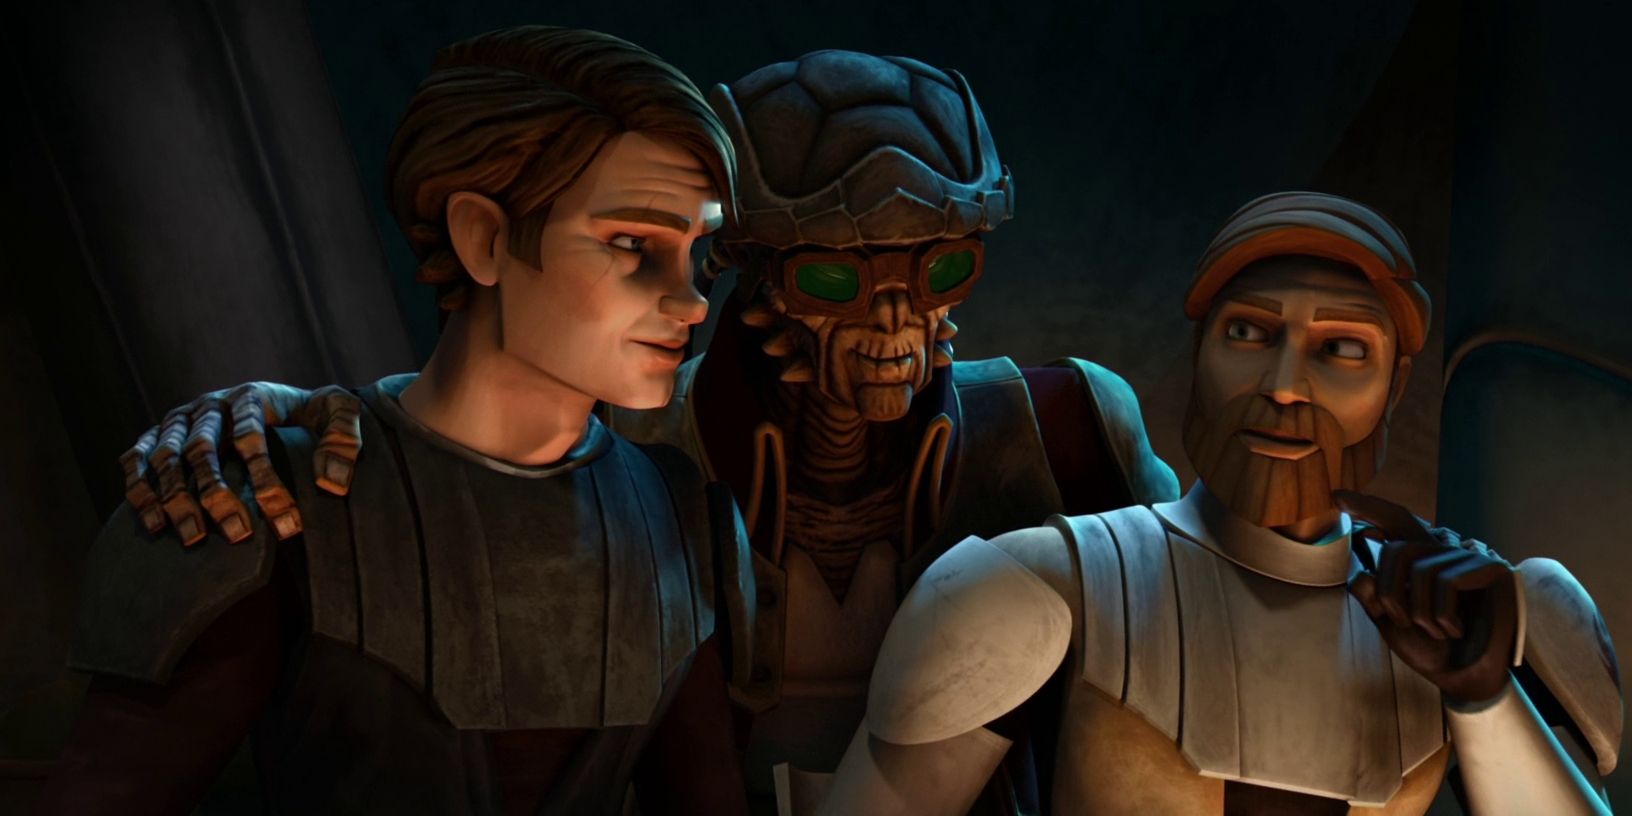 Hondo (center) putting his hands on the shoulders of Anakin (left) and Obi-Wan (right). Image source: Wookiepedia.com